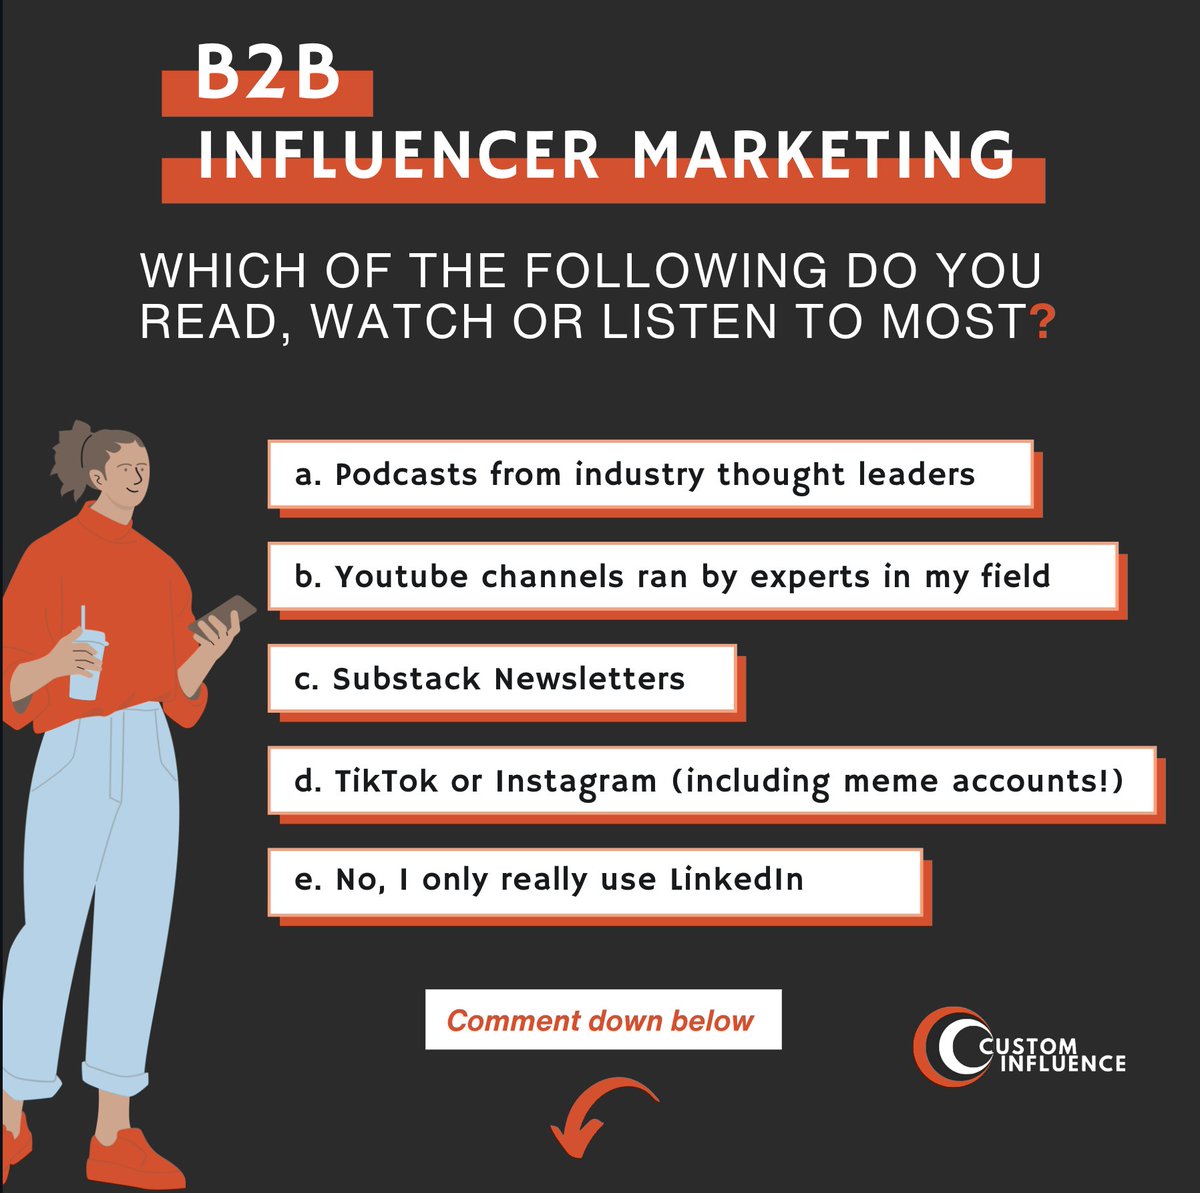 Leave your comment down below.

custominfluence.com

#B2BInfluencerMarketing #CreatorContent #Subscribe
#Podcasts #Youtubeforb2b #TiKTok